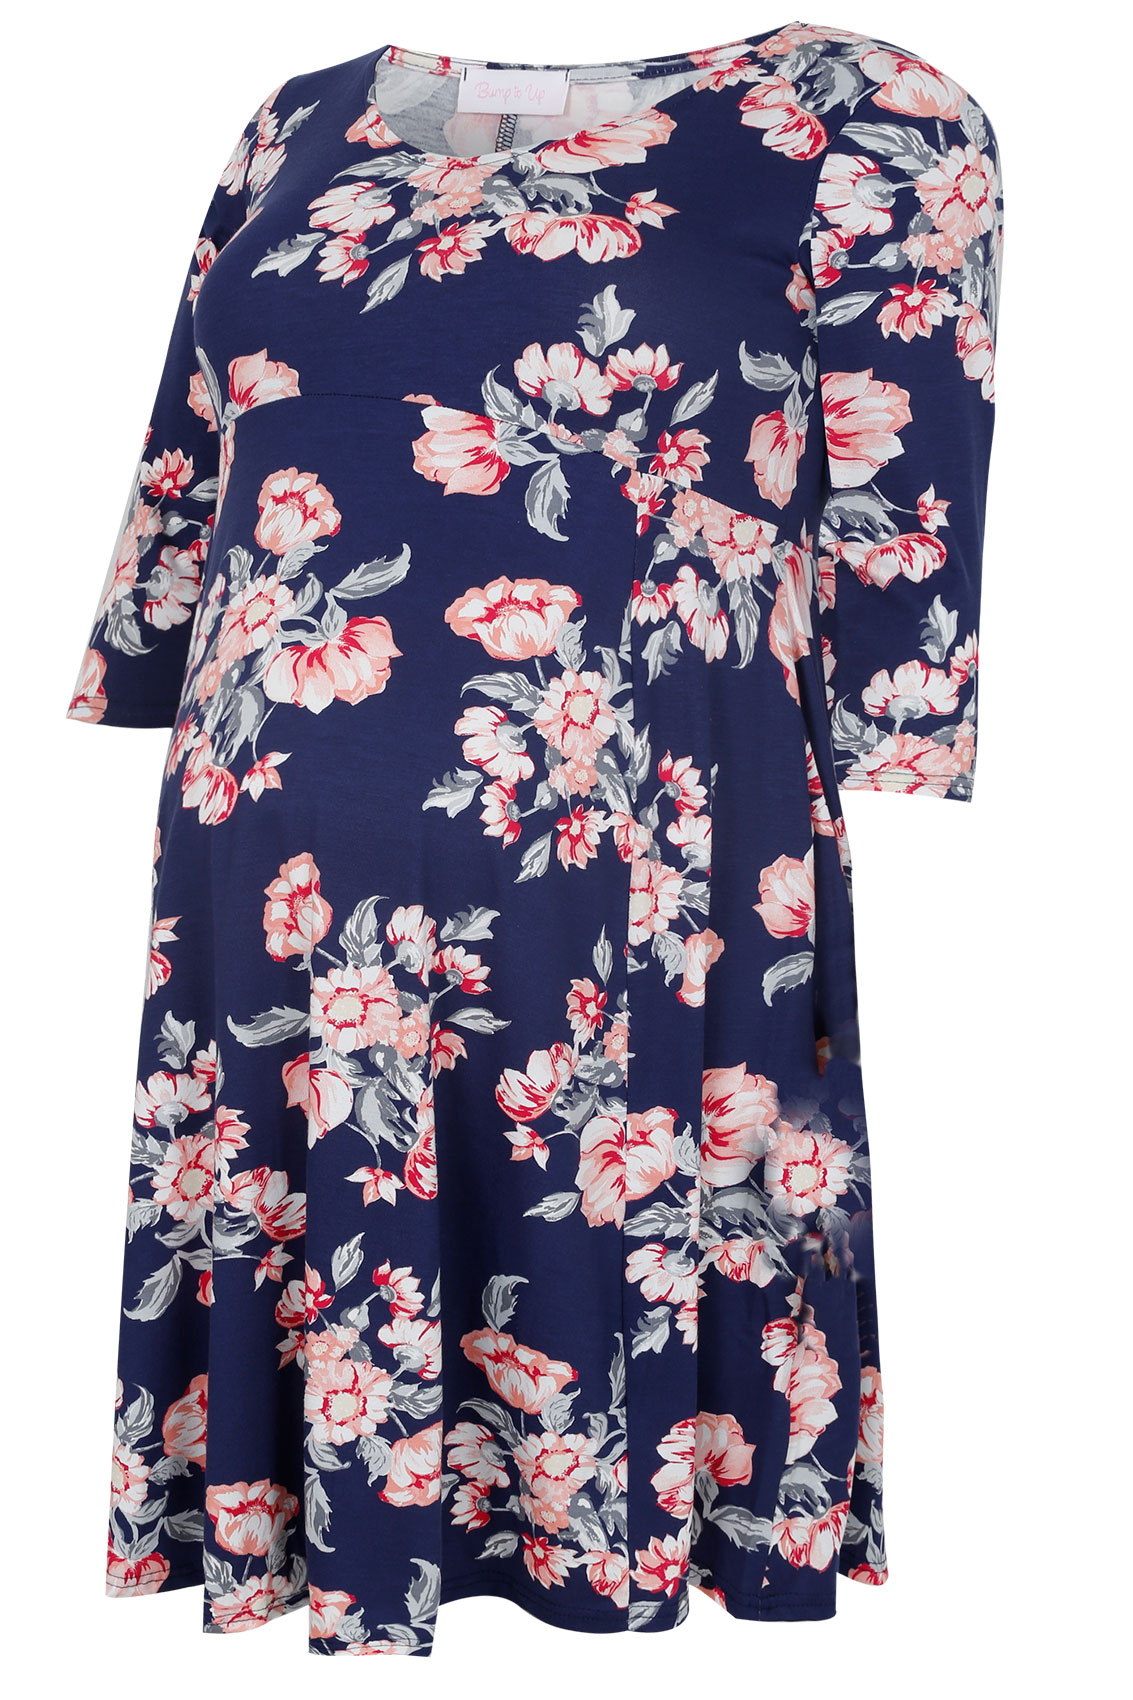 BUMP IT UP MATERNITY Navy & Peach Floral Print Dress With Half Sleeves ...